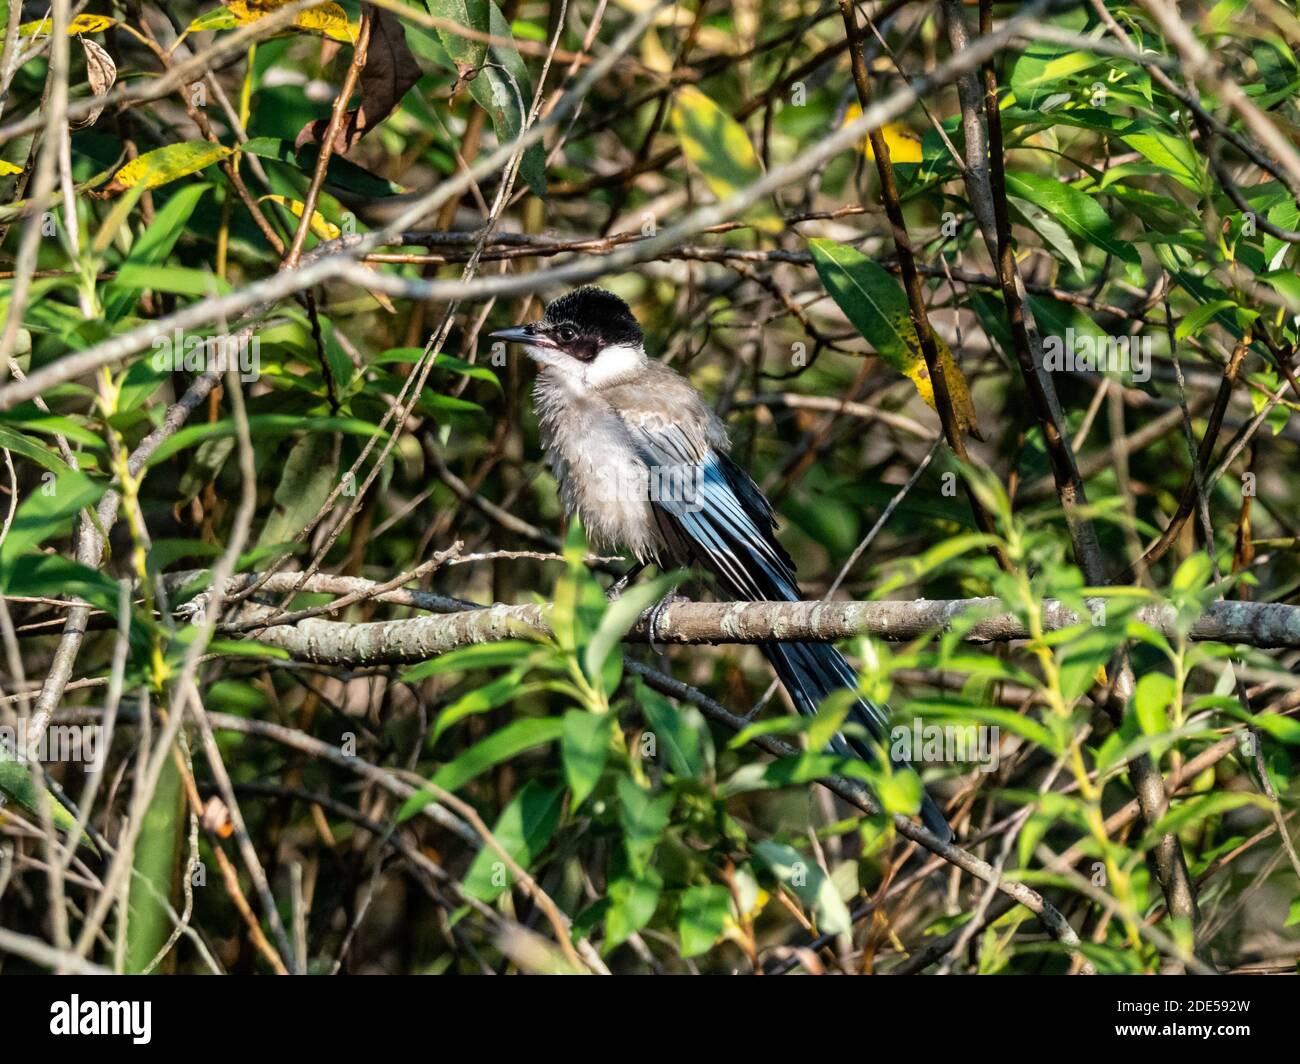 Azure-winged Magpie, Cyanopica cyanus, perched in the underbrush along a pond in Izumi Forest, Yamato, Japan. Stock Photo